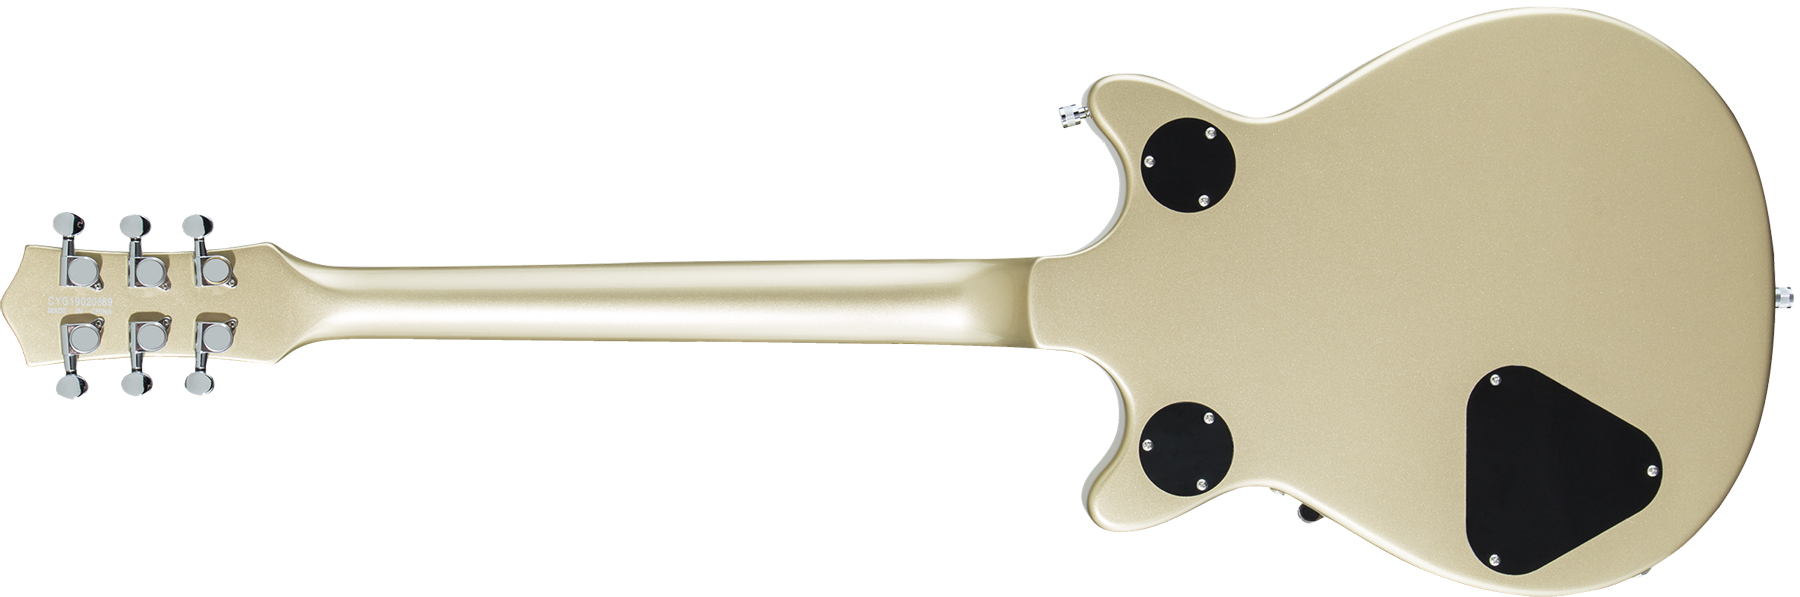 Gretsch G5232t Electromatic Double Jet Ft 2019 Hh Bigsby Lau - Casino Gold - Double Cut E-Gitarre - Variation 1